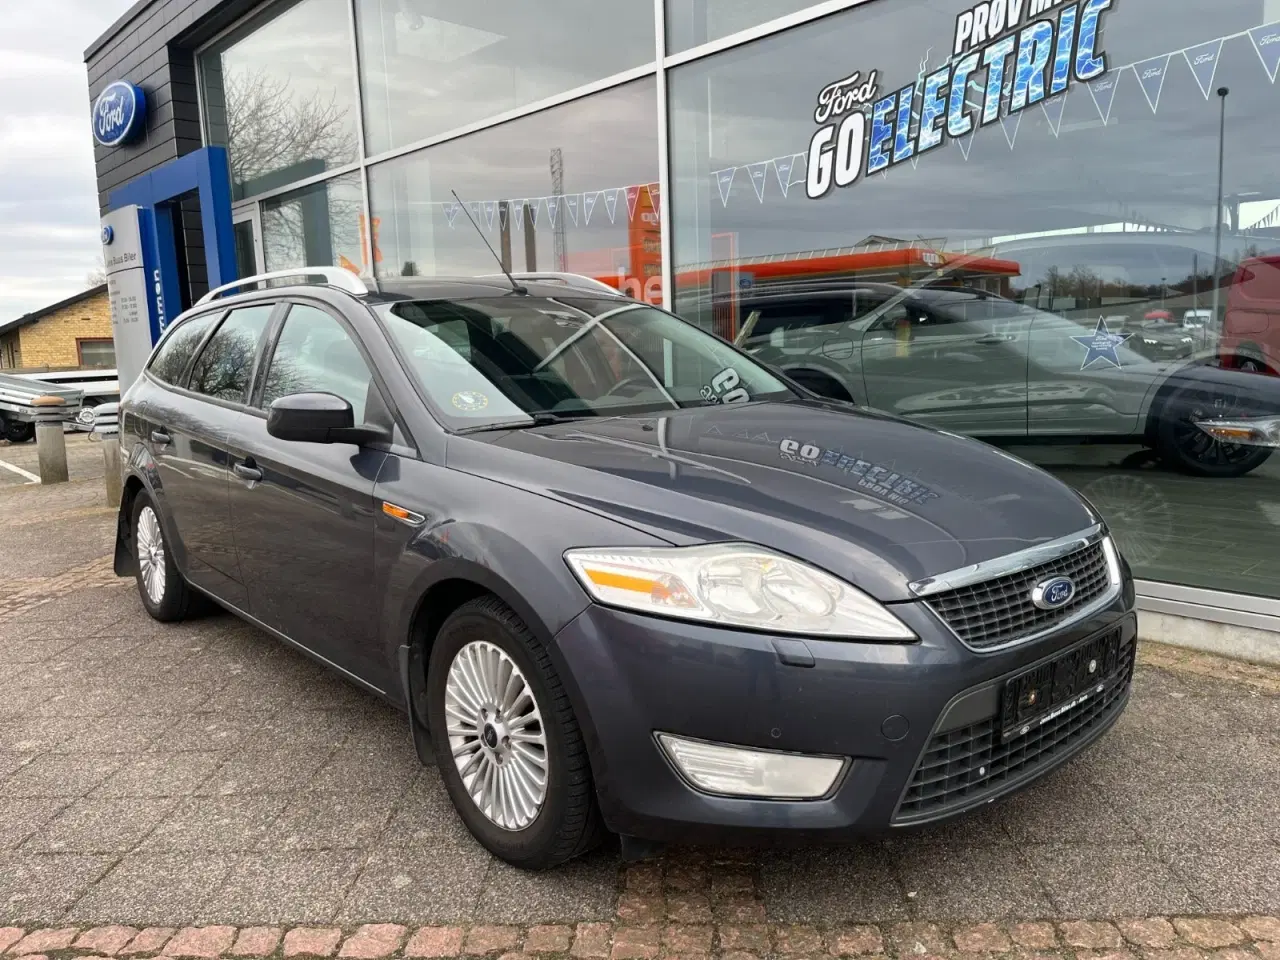 Billede 1 - Ford Mondeo 2,0 TDCi 115 ECOnetic stc.